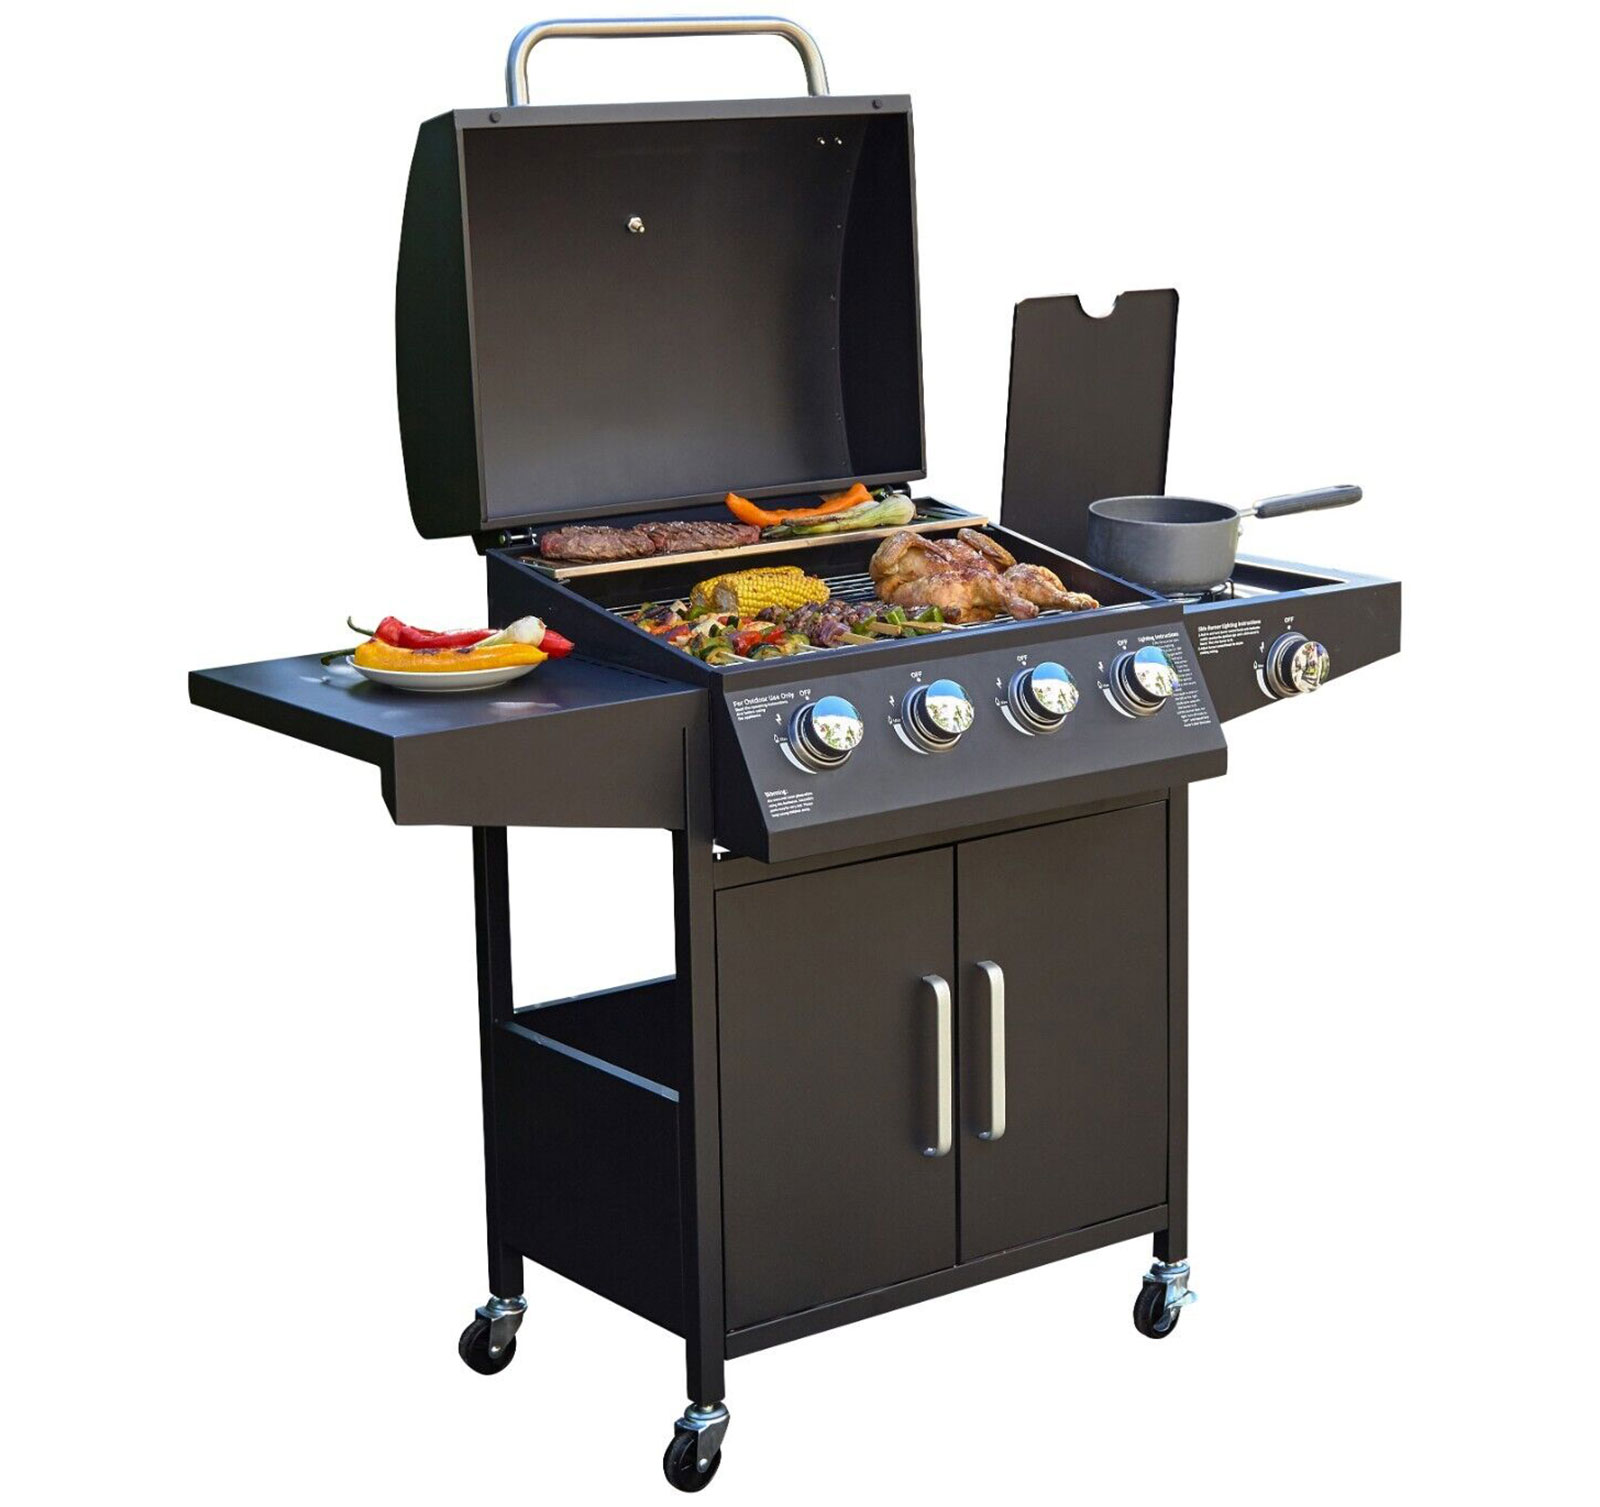 Neo Gas BBQ Grill and Cover Image 3